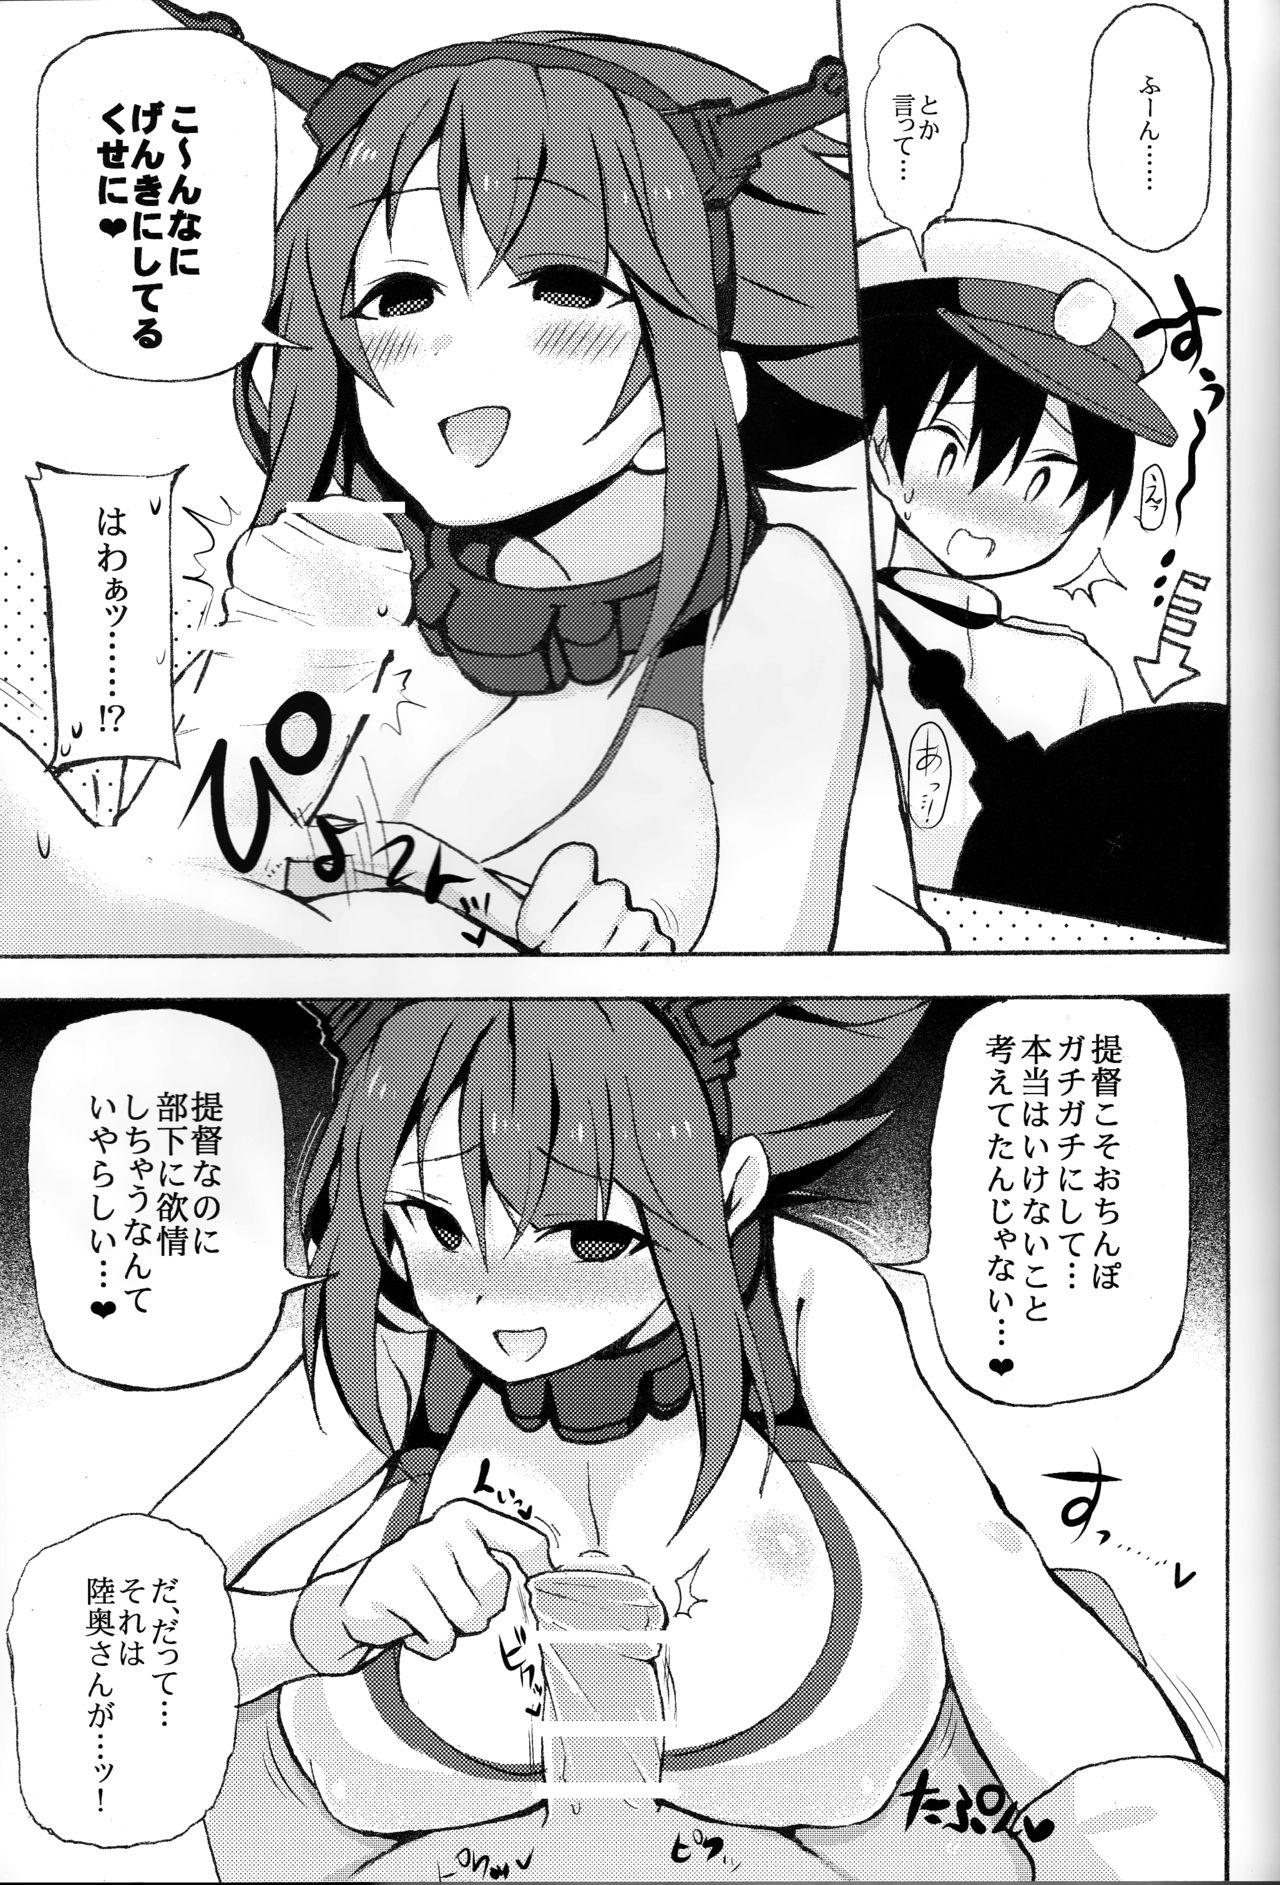 Ametur Porn Mutsu Onee-chaang!! - Kantai collection Free Amature Porn - Page 4